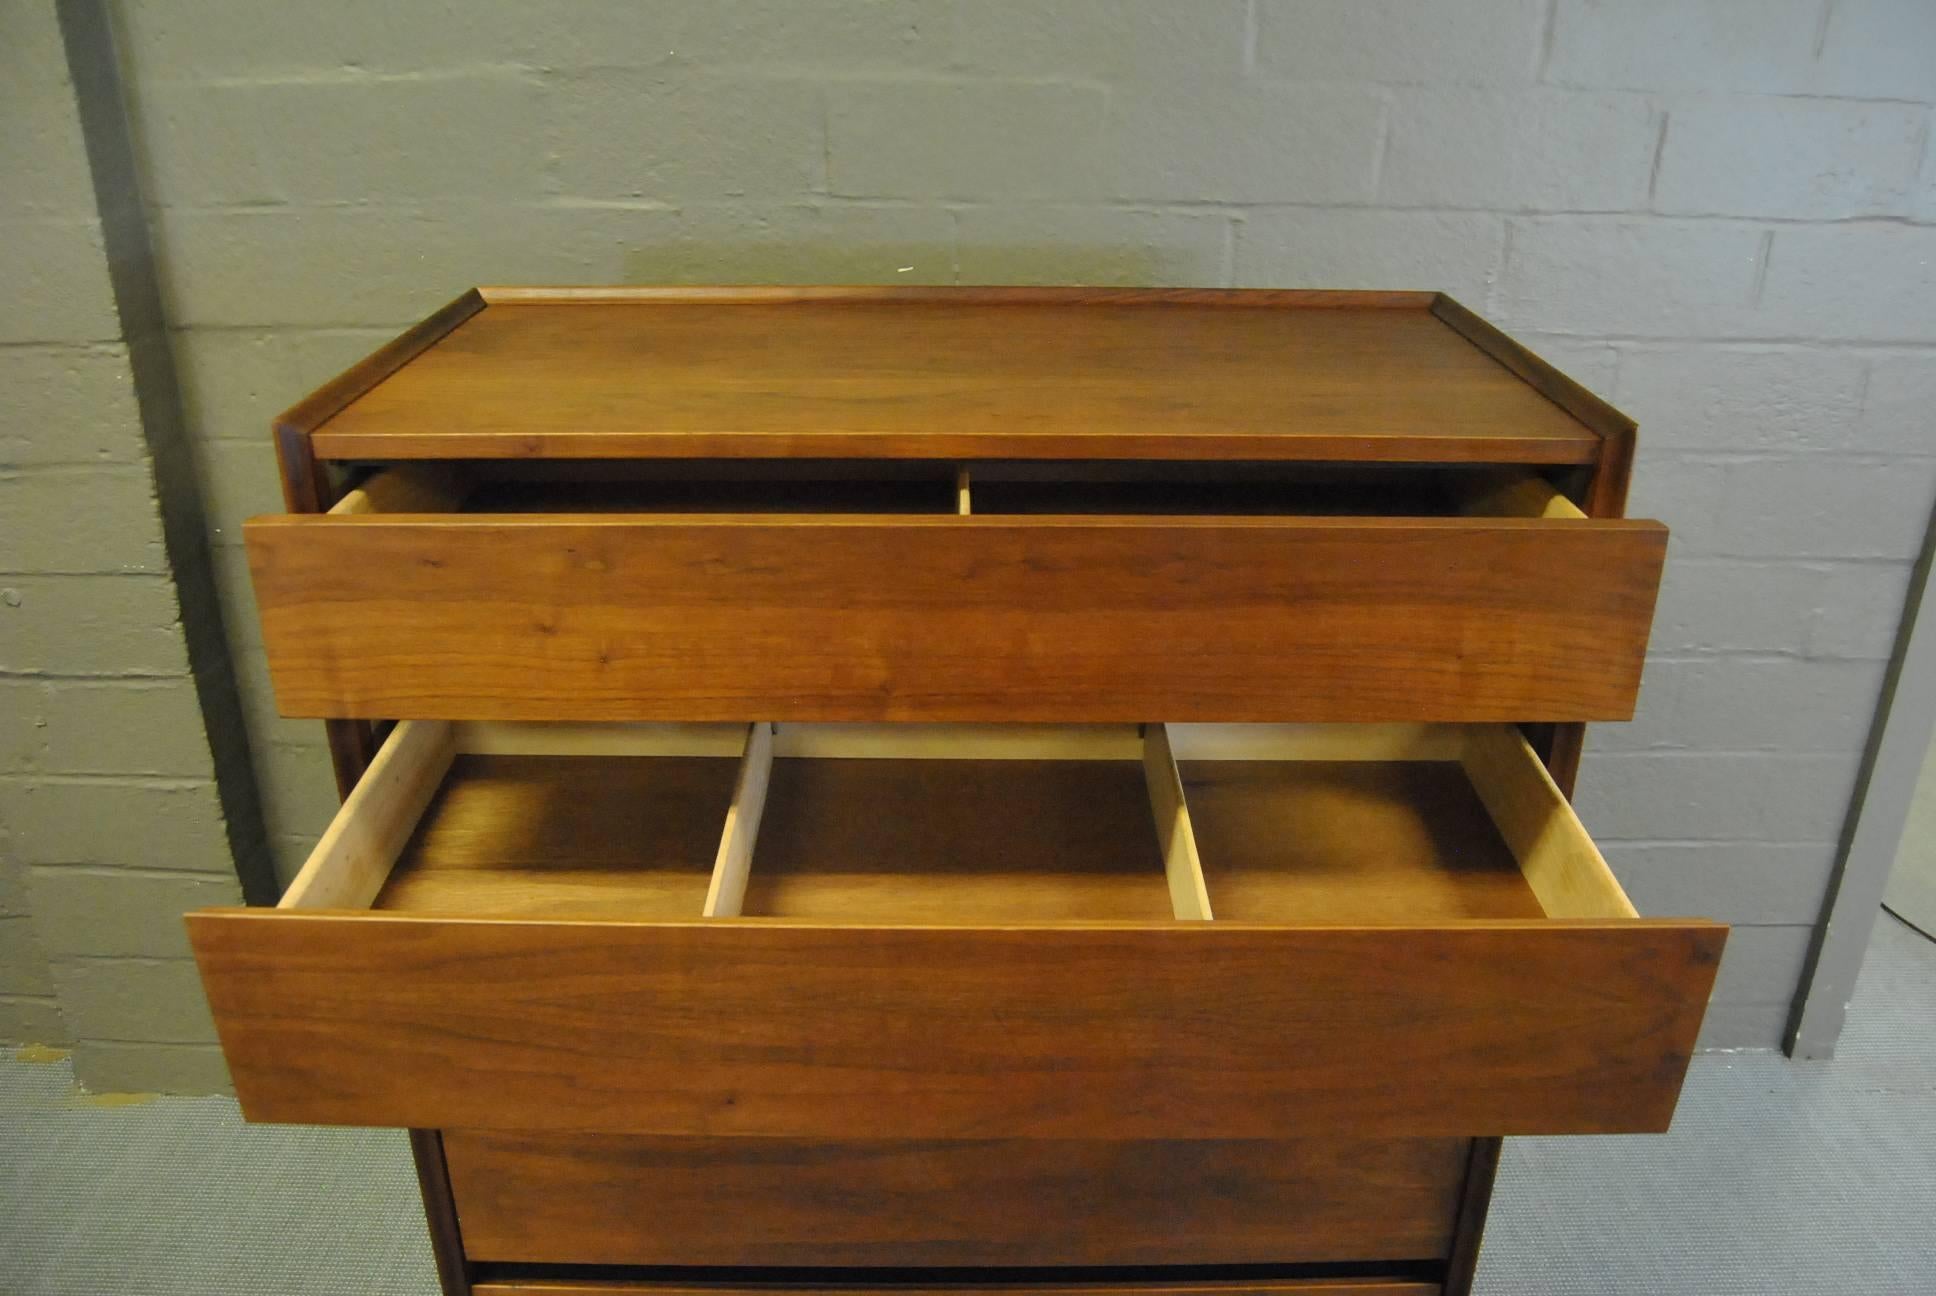 20th Century Mid-Century Modern Five-Drawer Walnut Tall Chest by Dillingham Esprit Collection